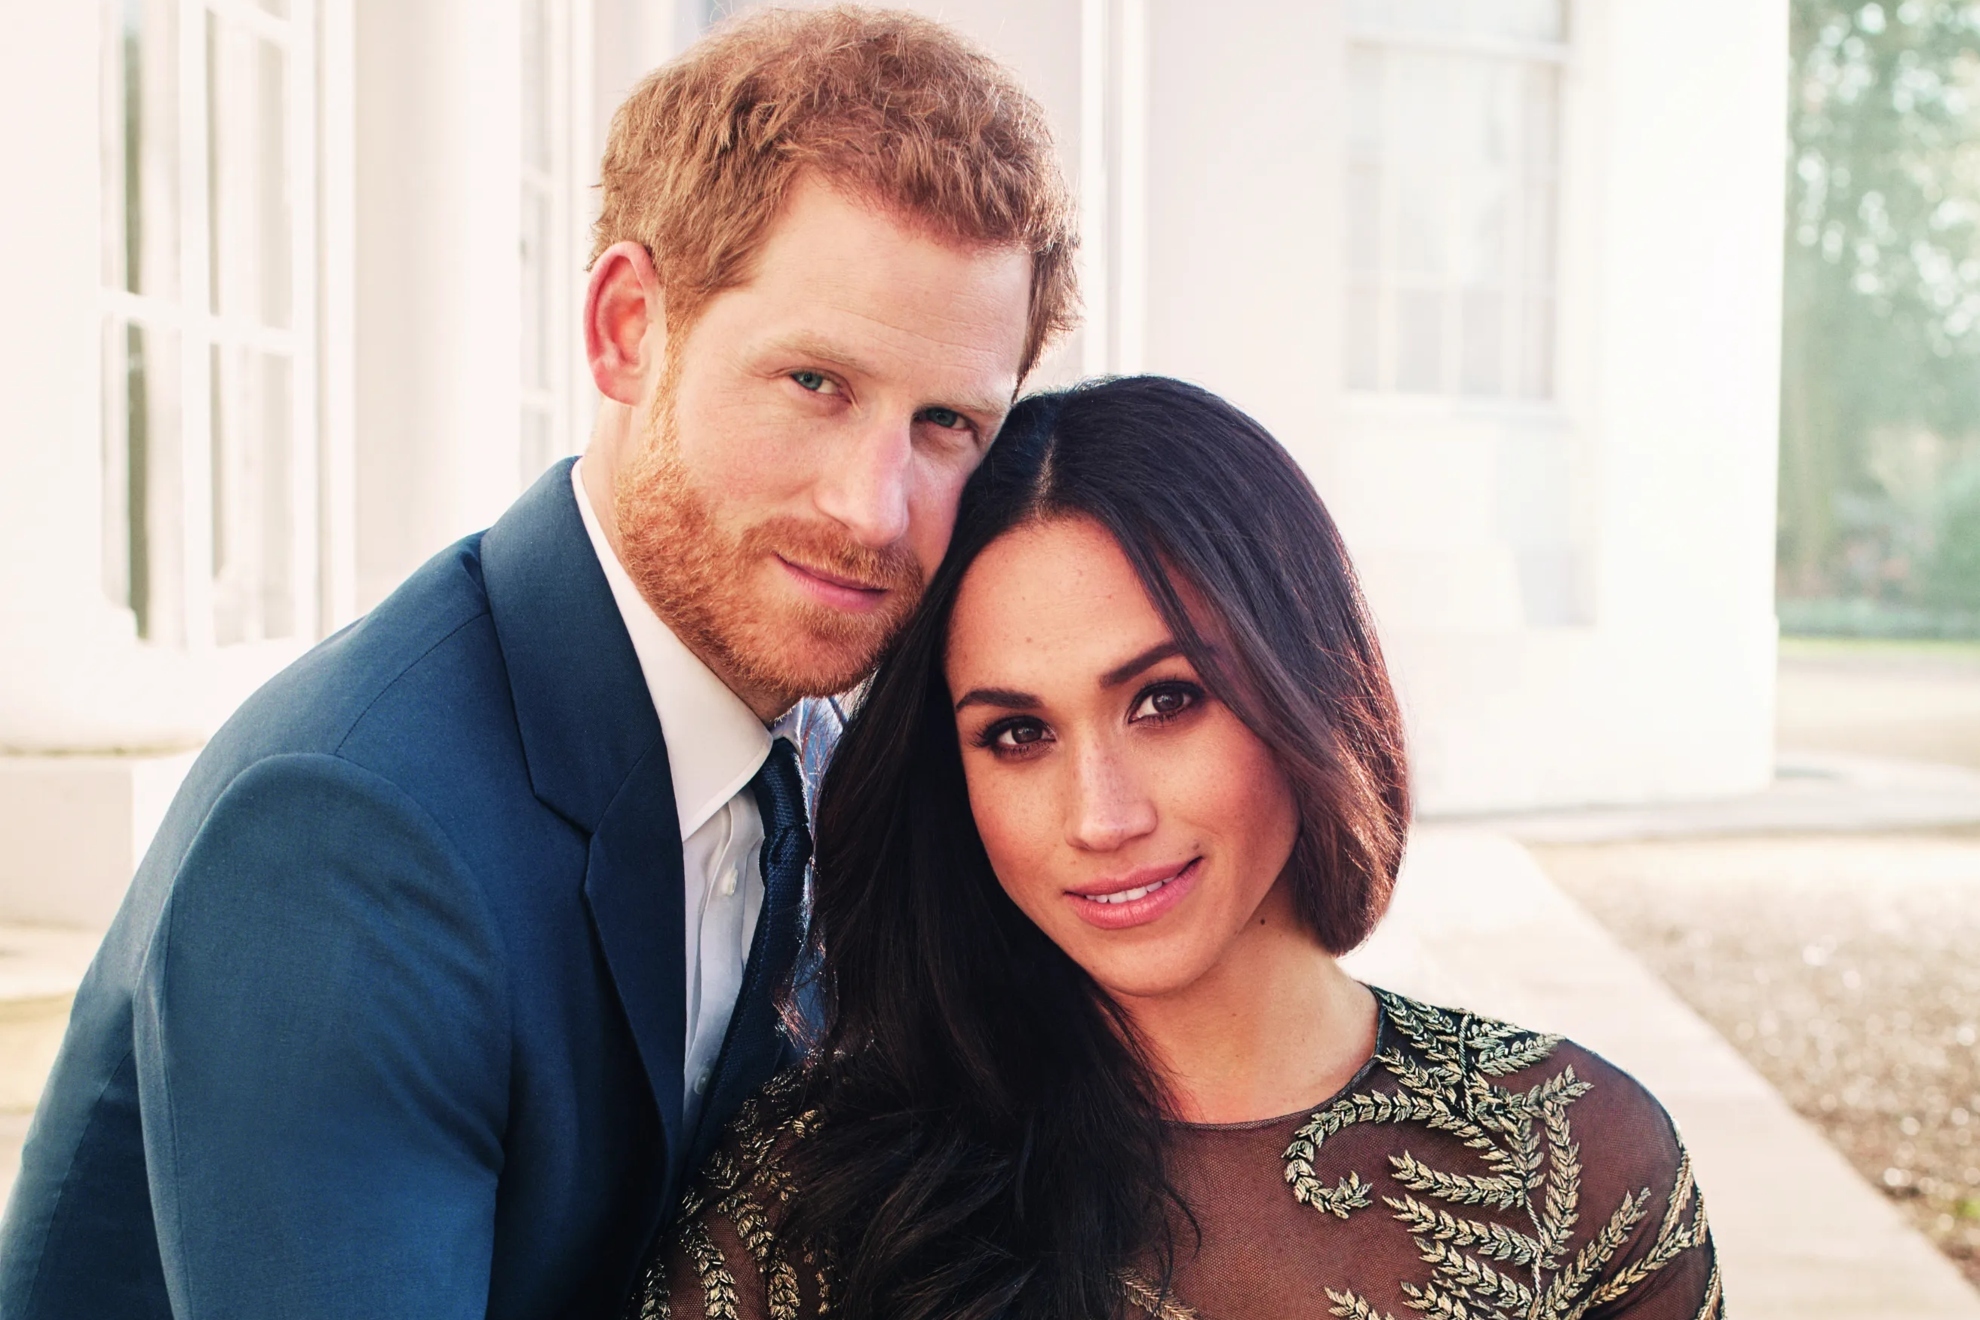 Prince Harry and Meghan Markle's Netflix show confirmed for December